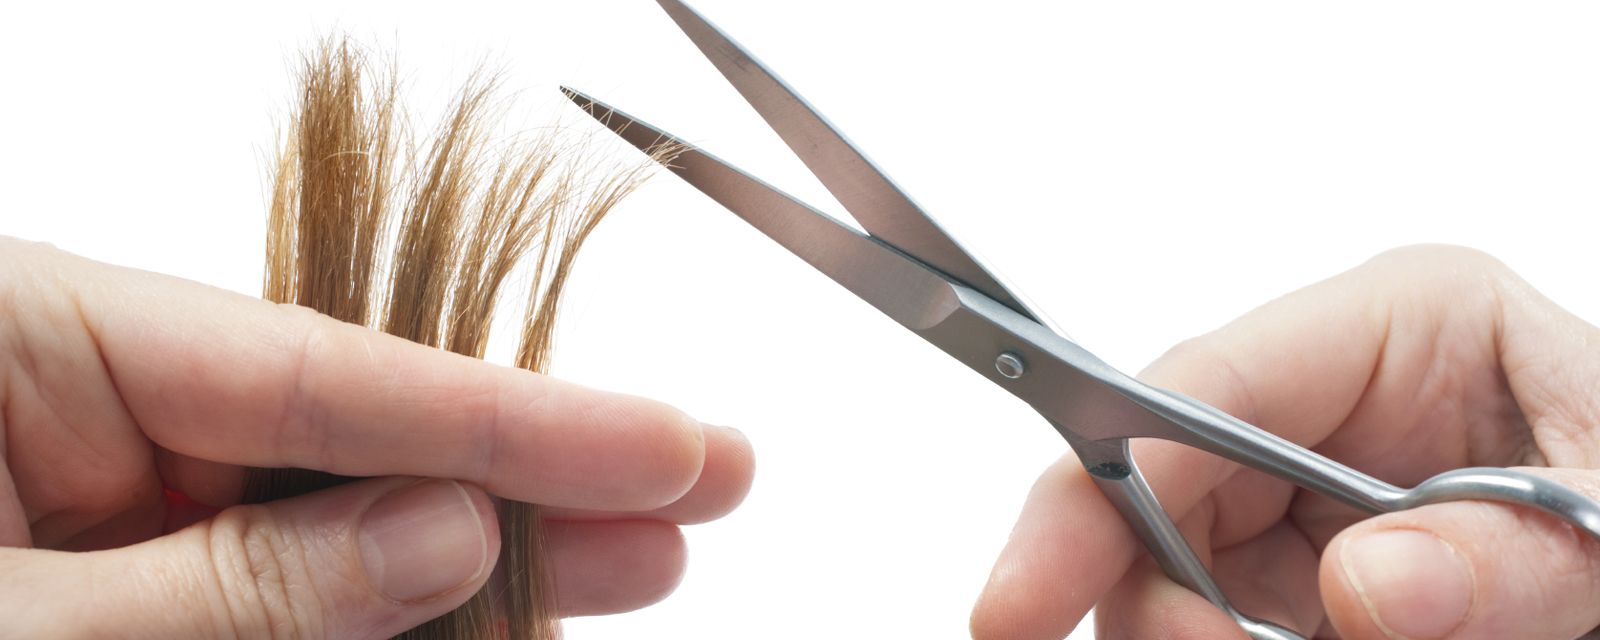 Does Cutting Hair Make It Grow Faster?